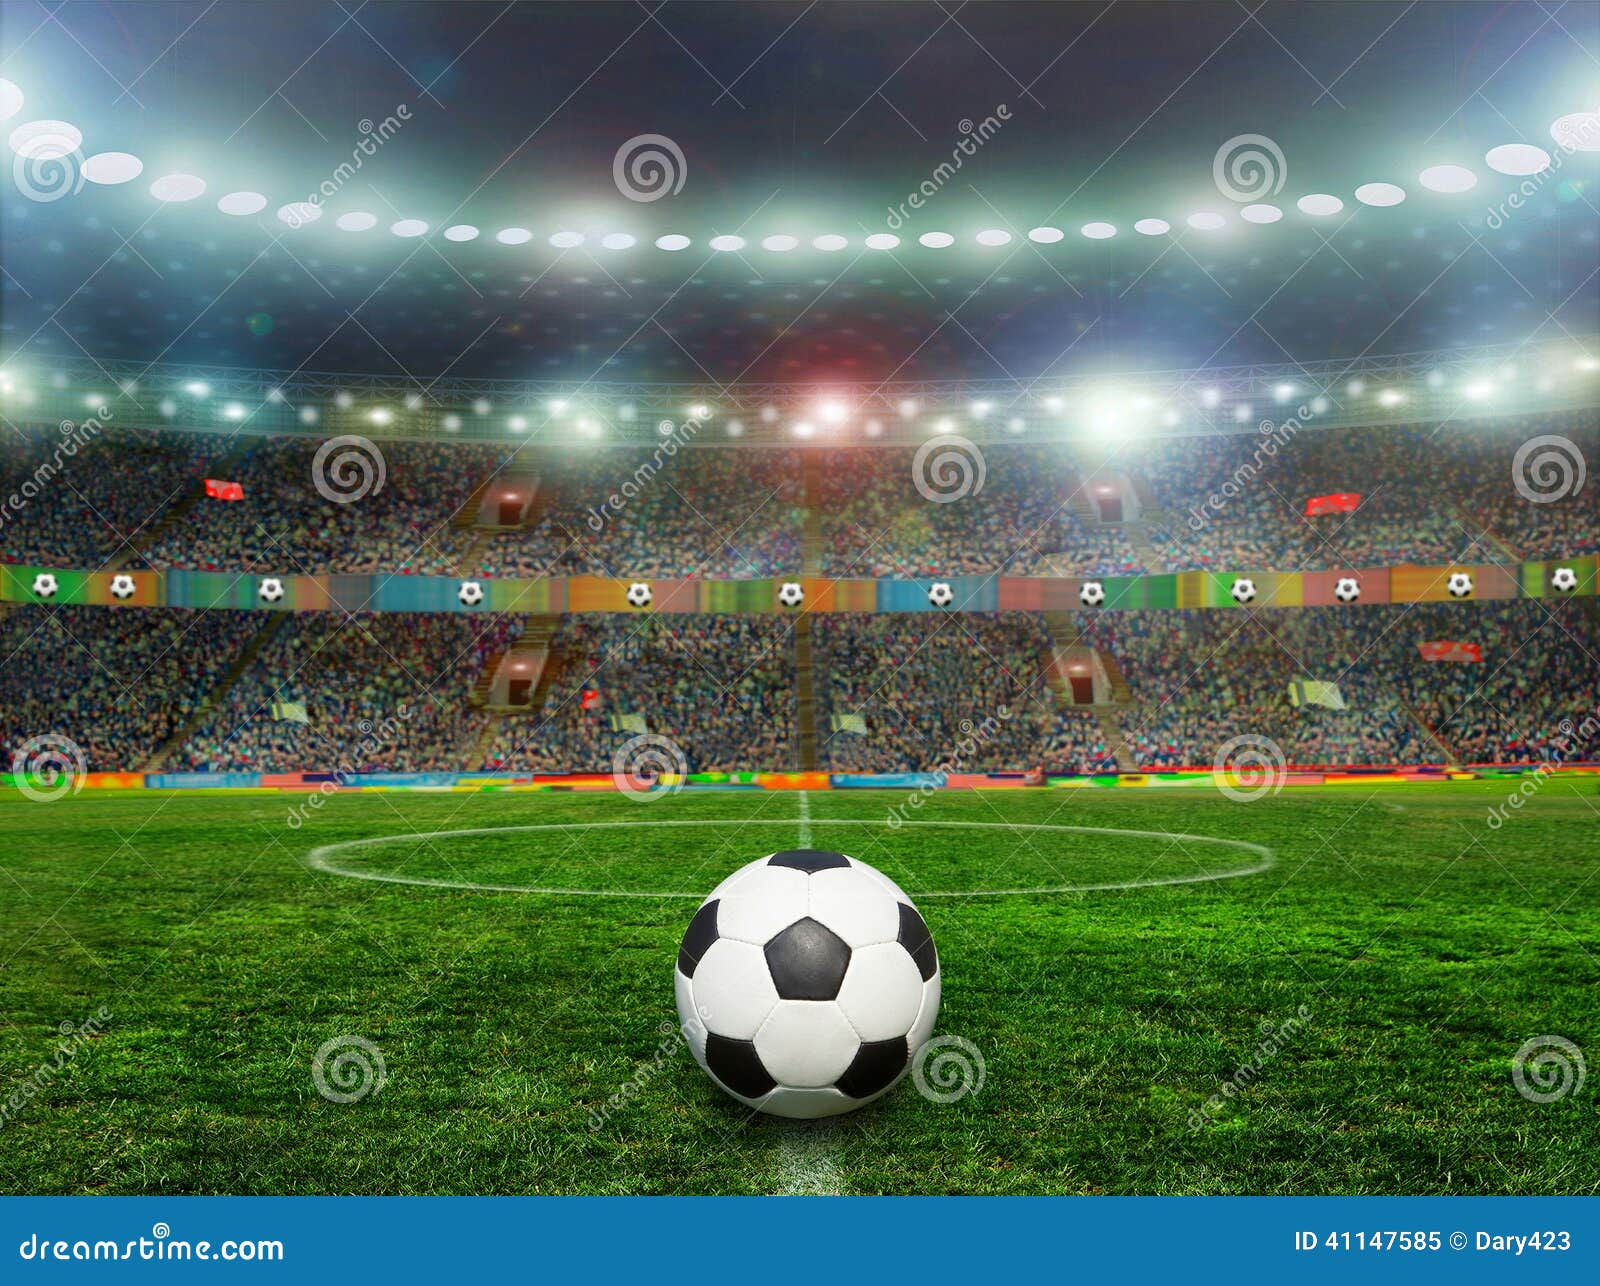 Soccer ball stock image. Image of gate, leisure, ground - 41147585